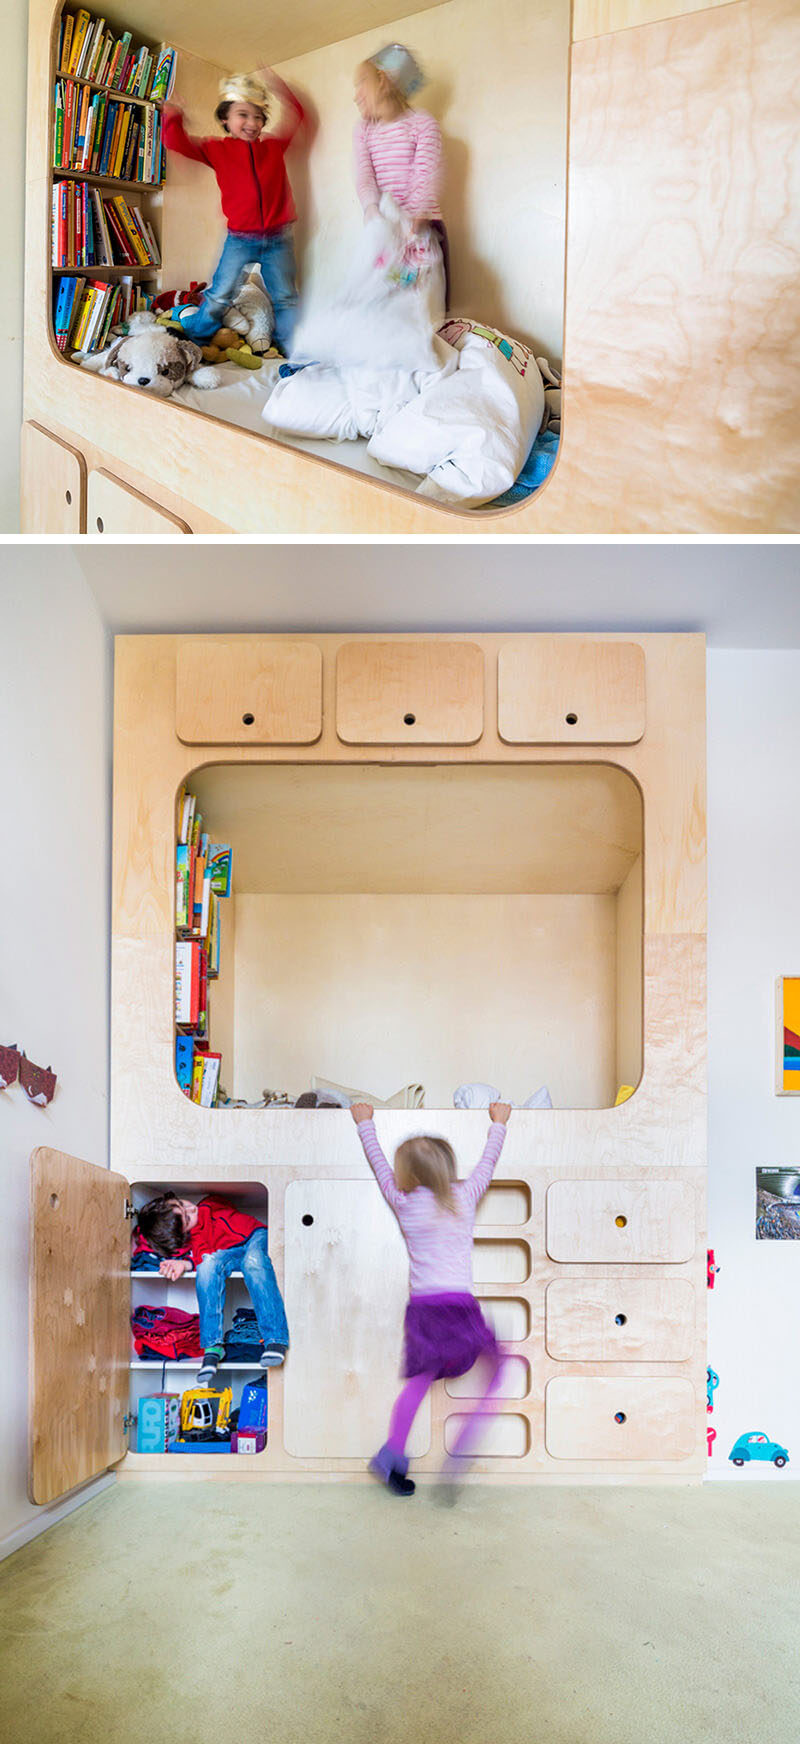 Kids Bedroom Design Ideas - Include A Cubby Or Reading Nook For Them To Play In